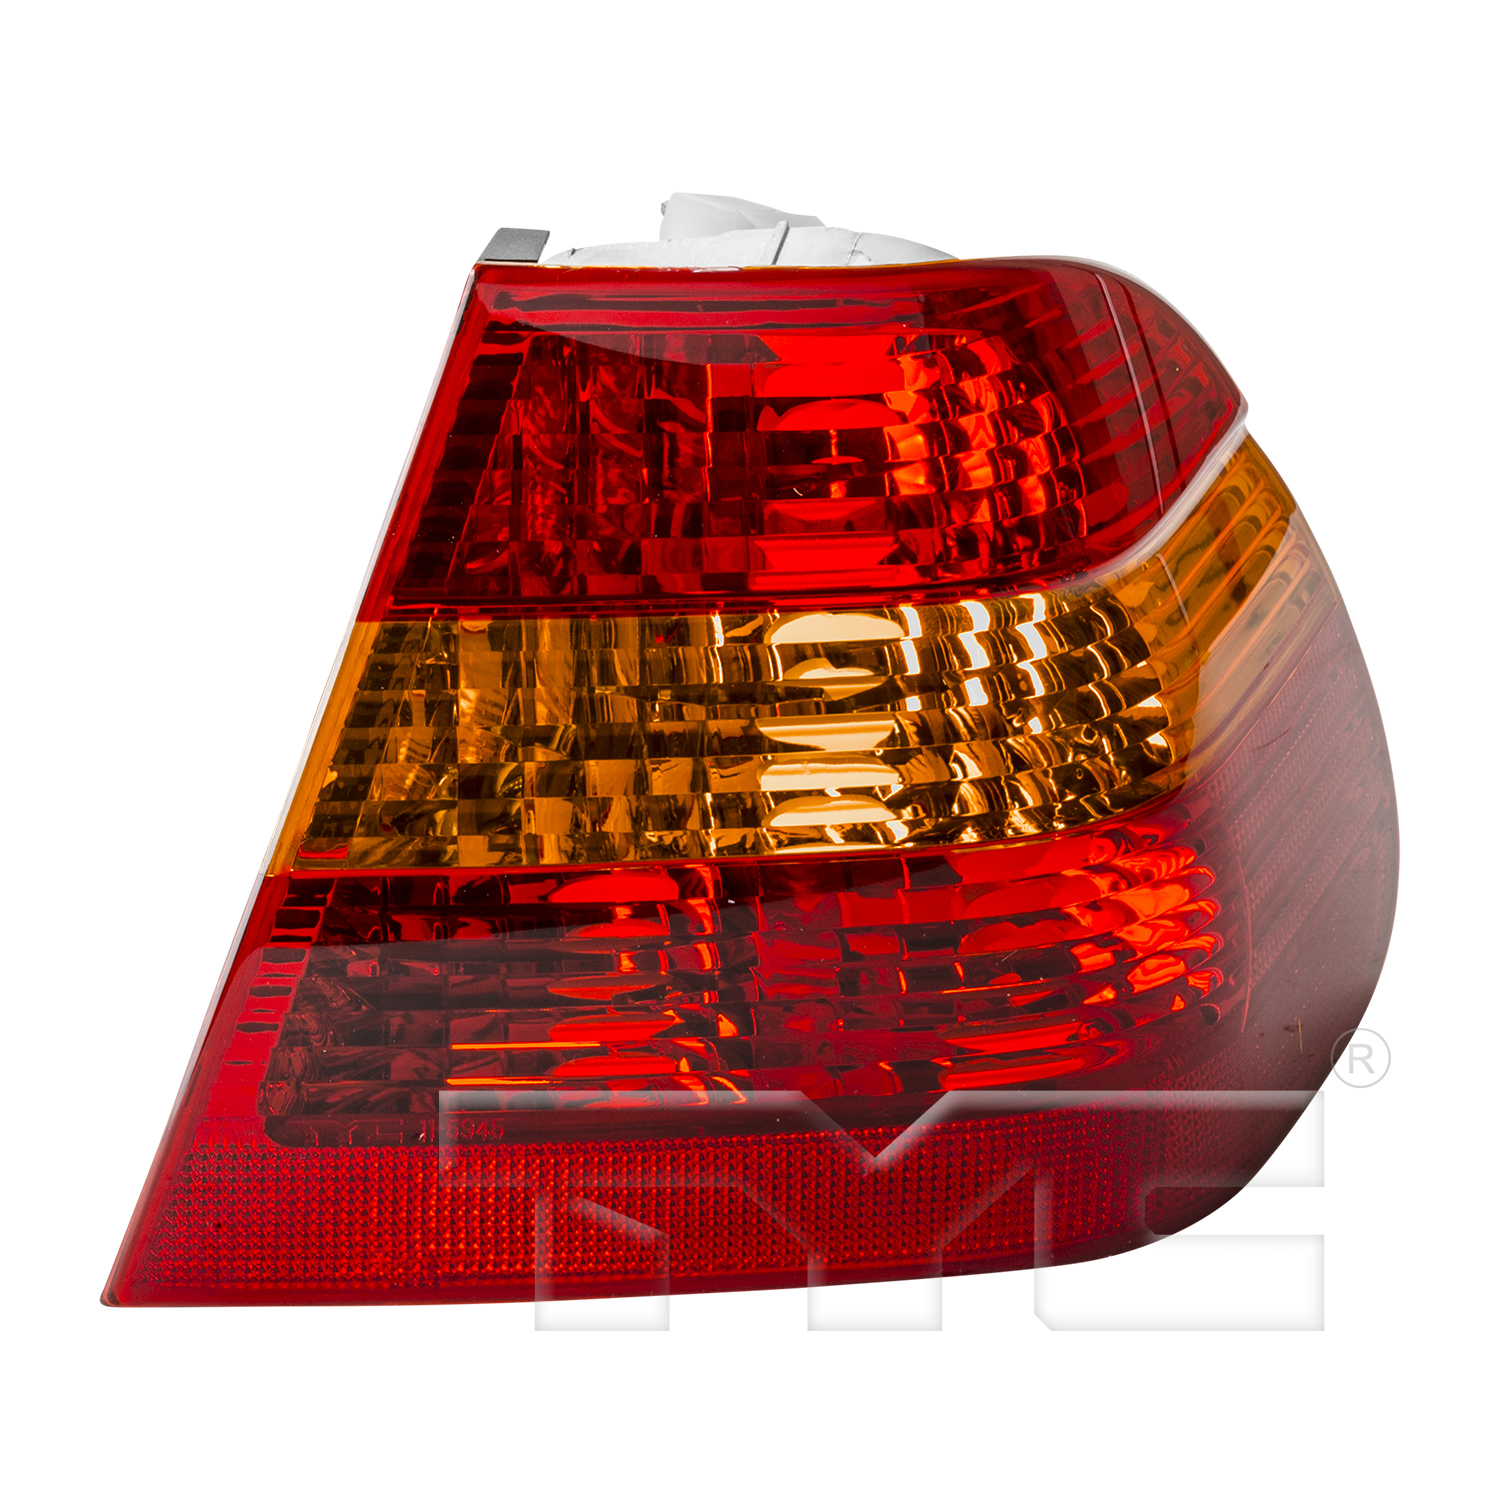 Aftermarket TAILLIGHTS for BMW - 325I, 325i,02-05,RT Taillamp assy